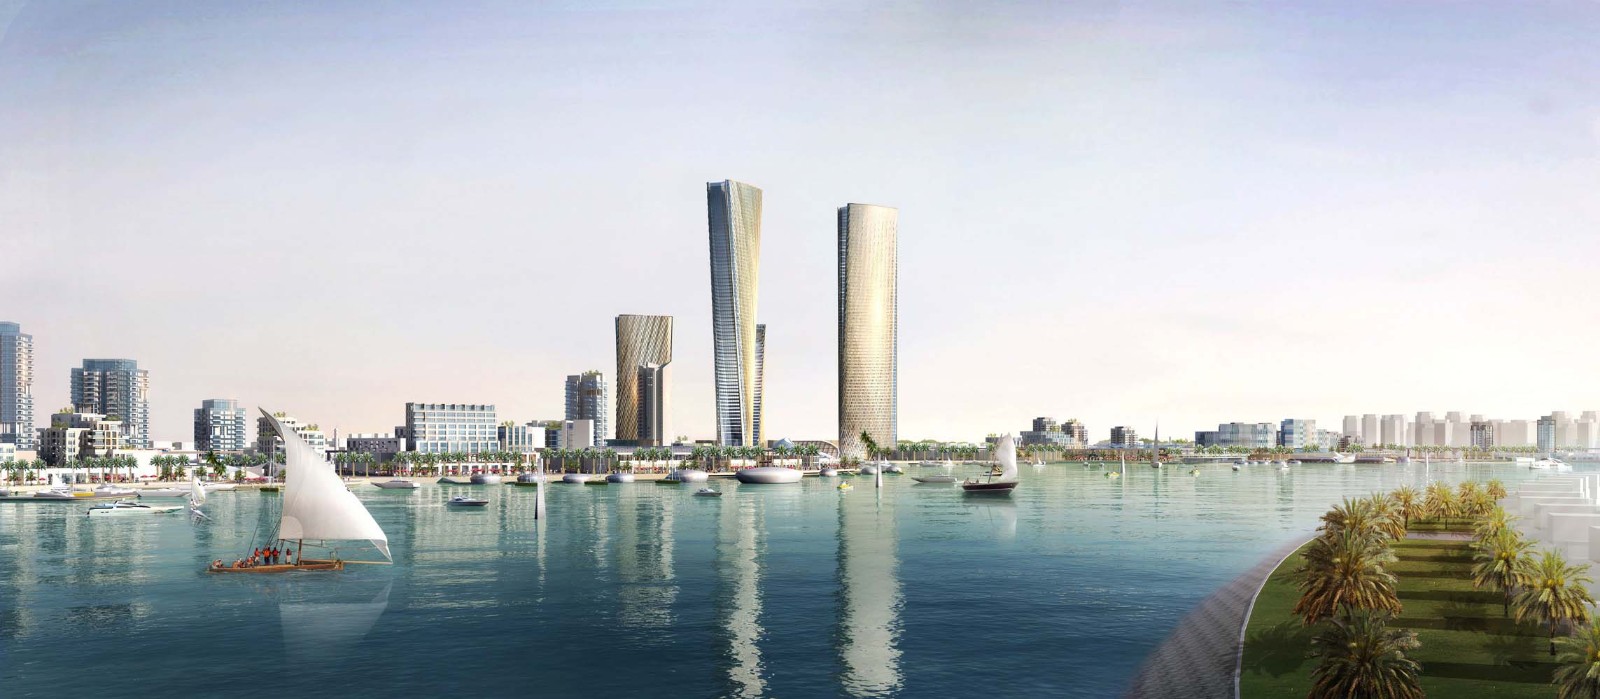 THE LUSAIL PLAZA0